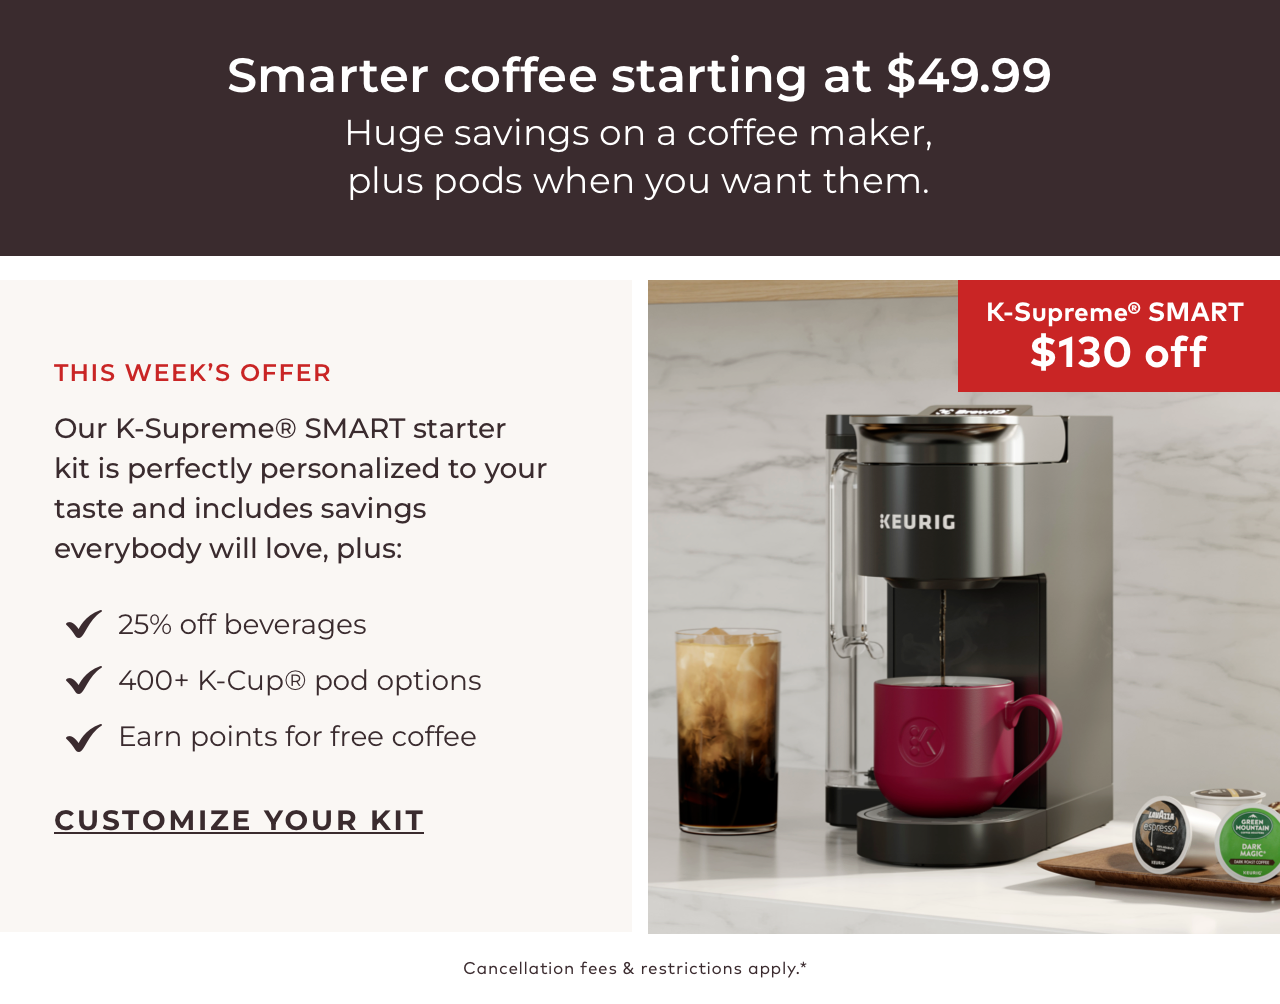 Get the K-Supreme® SMART Coffee Maker for \\$49.99 as a Starter Kit